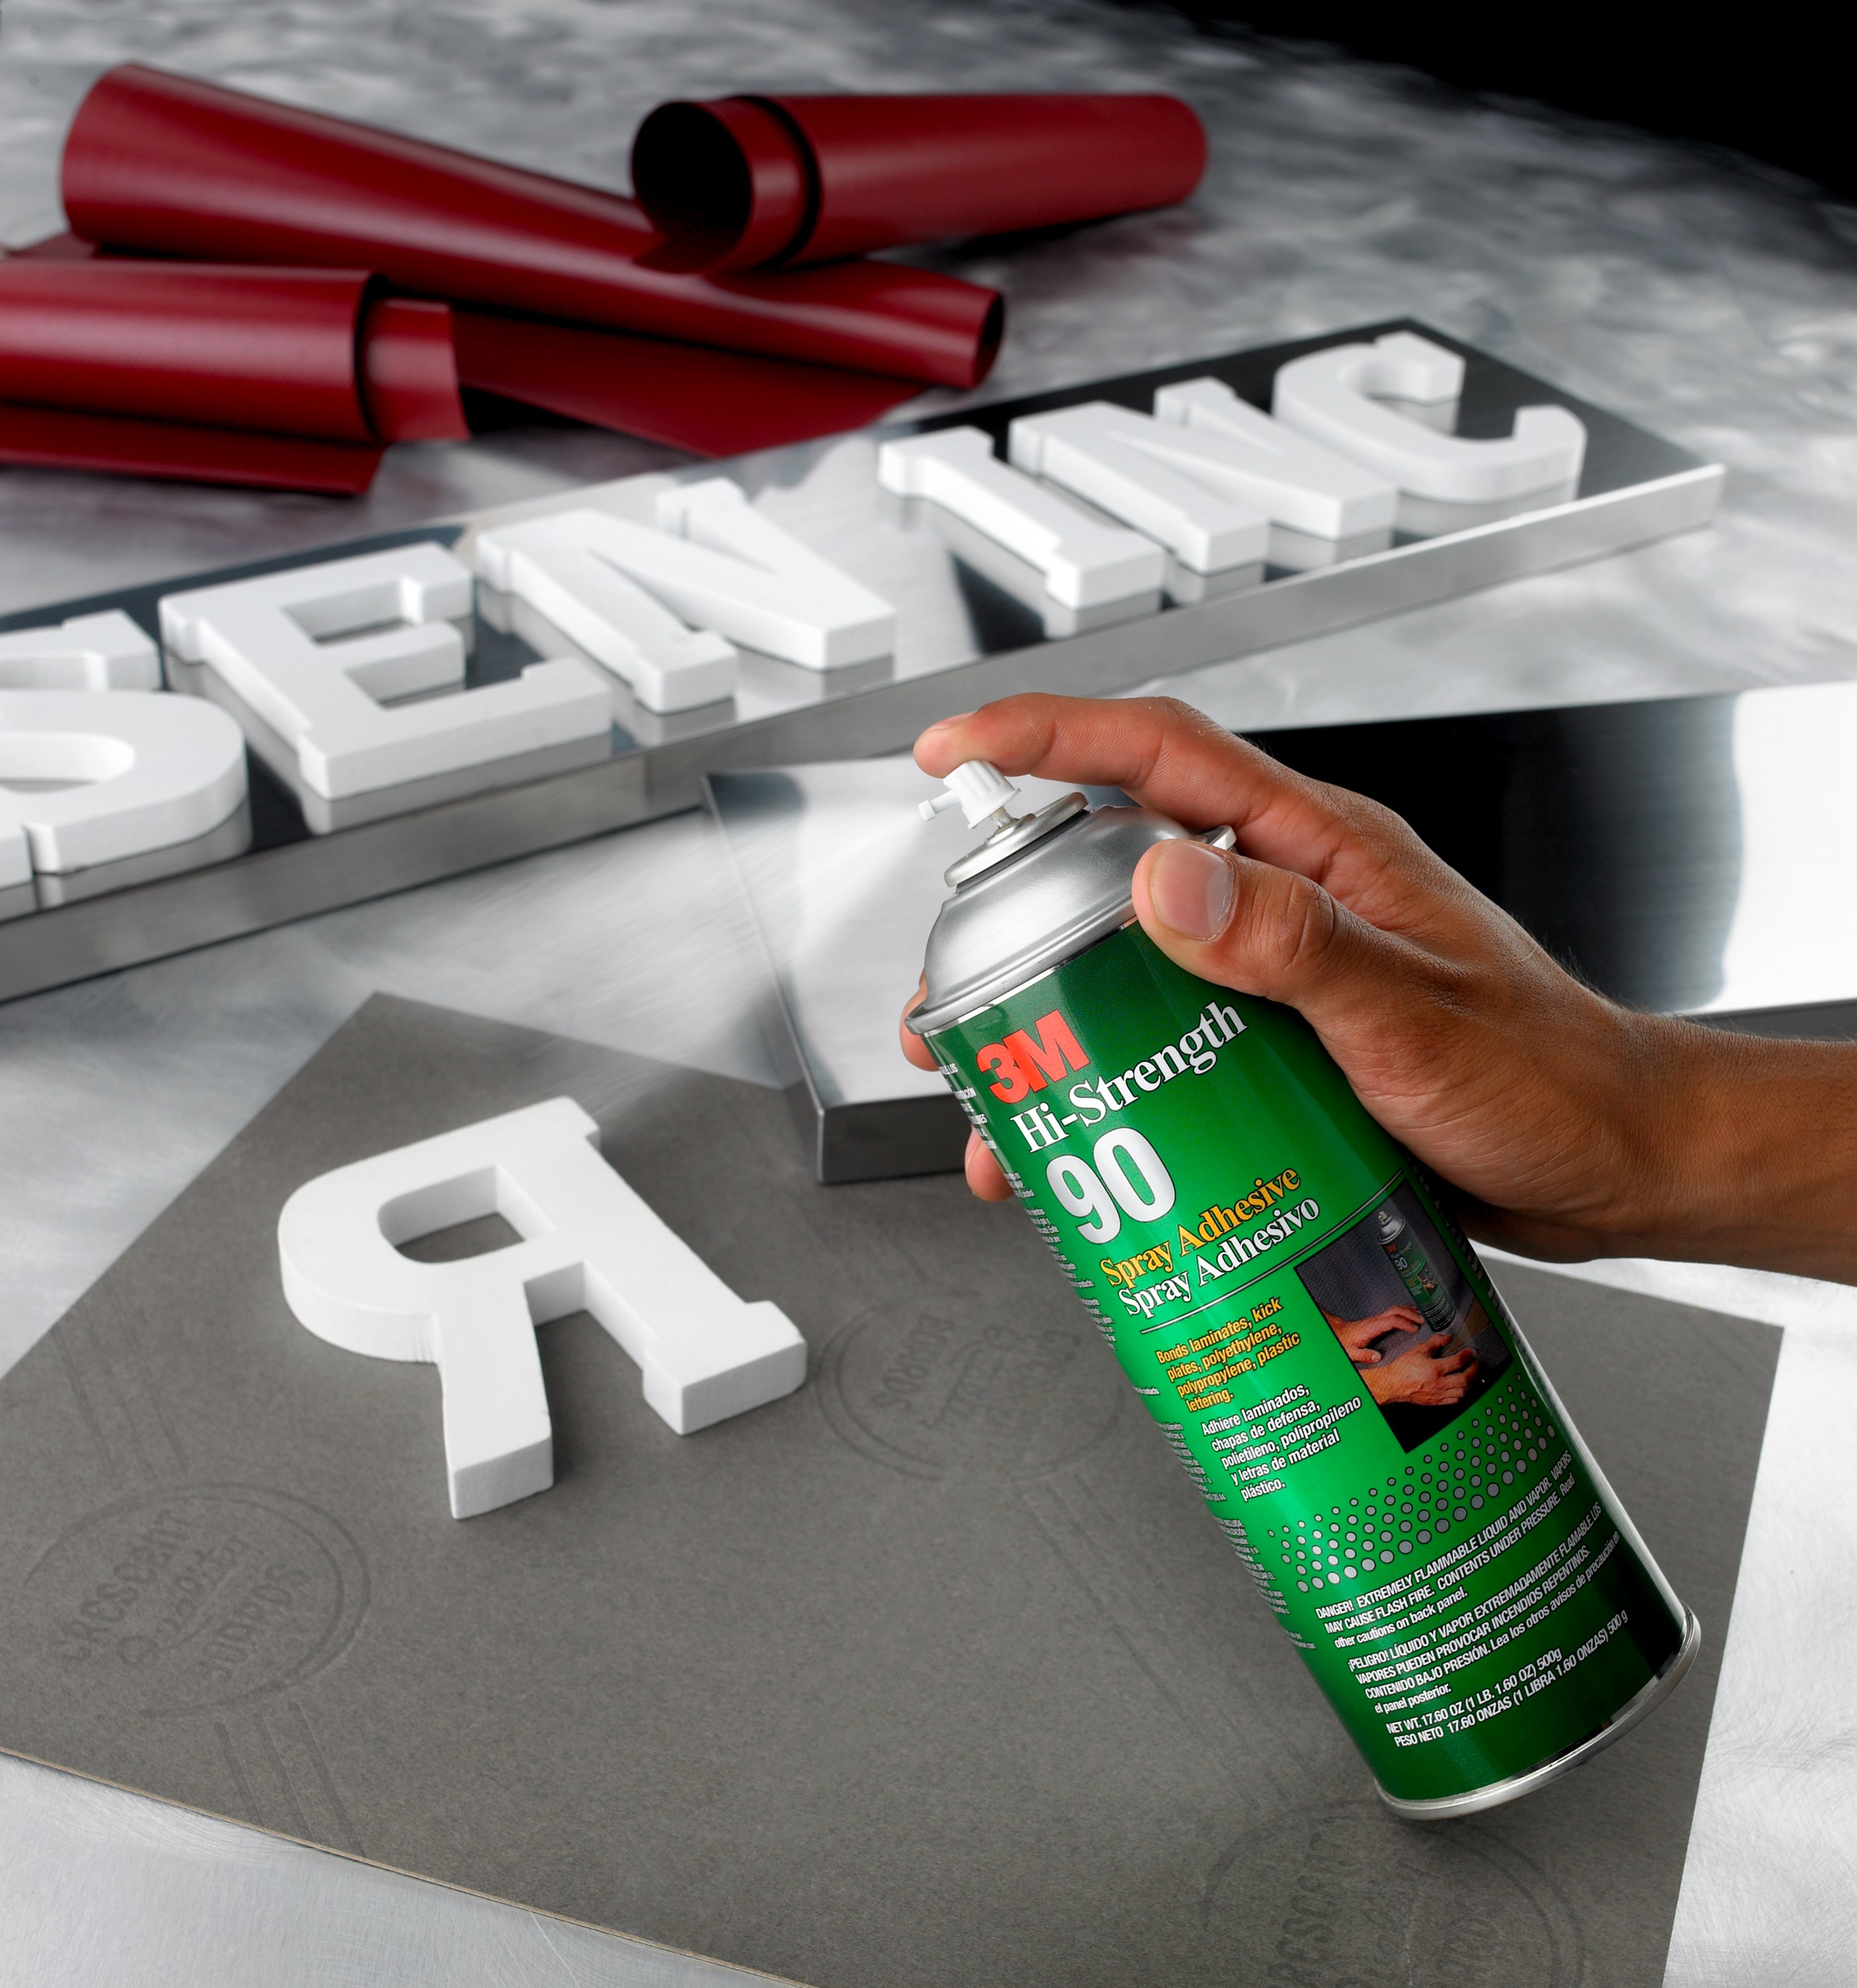 3M™ Hi-Strength 90 Spray Adhesive is capable of forming extremely strong bonds on a wide array of materials, including paper, cardboard, fabric and insulation.